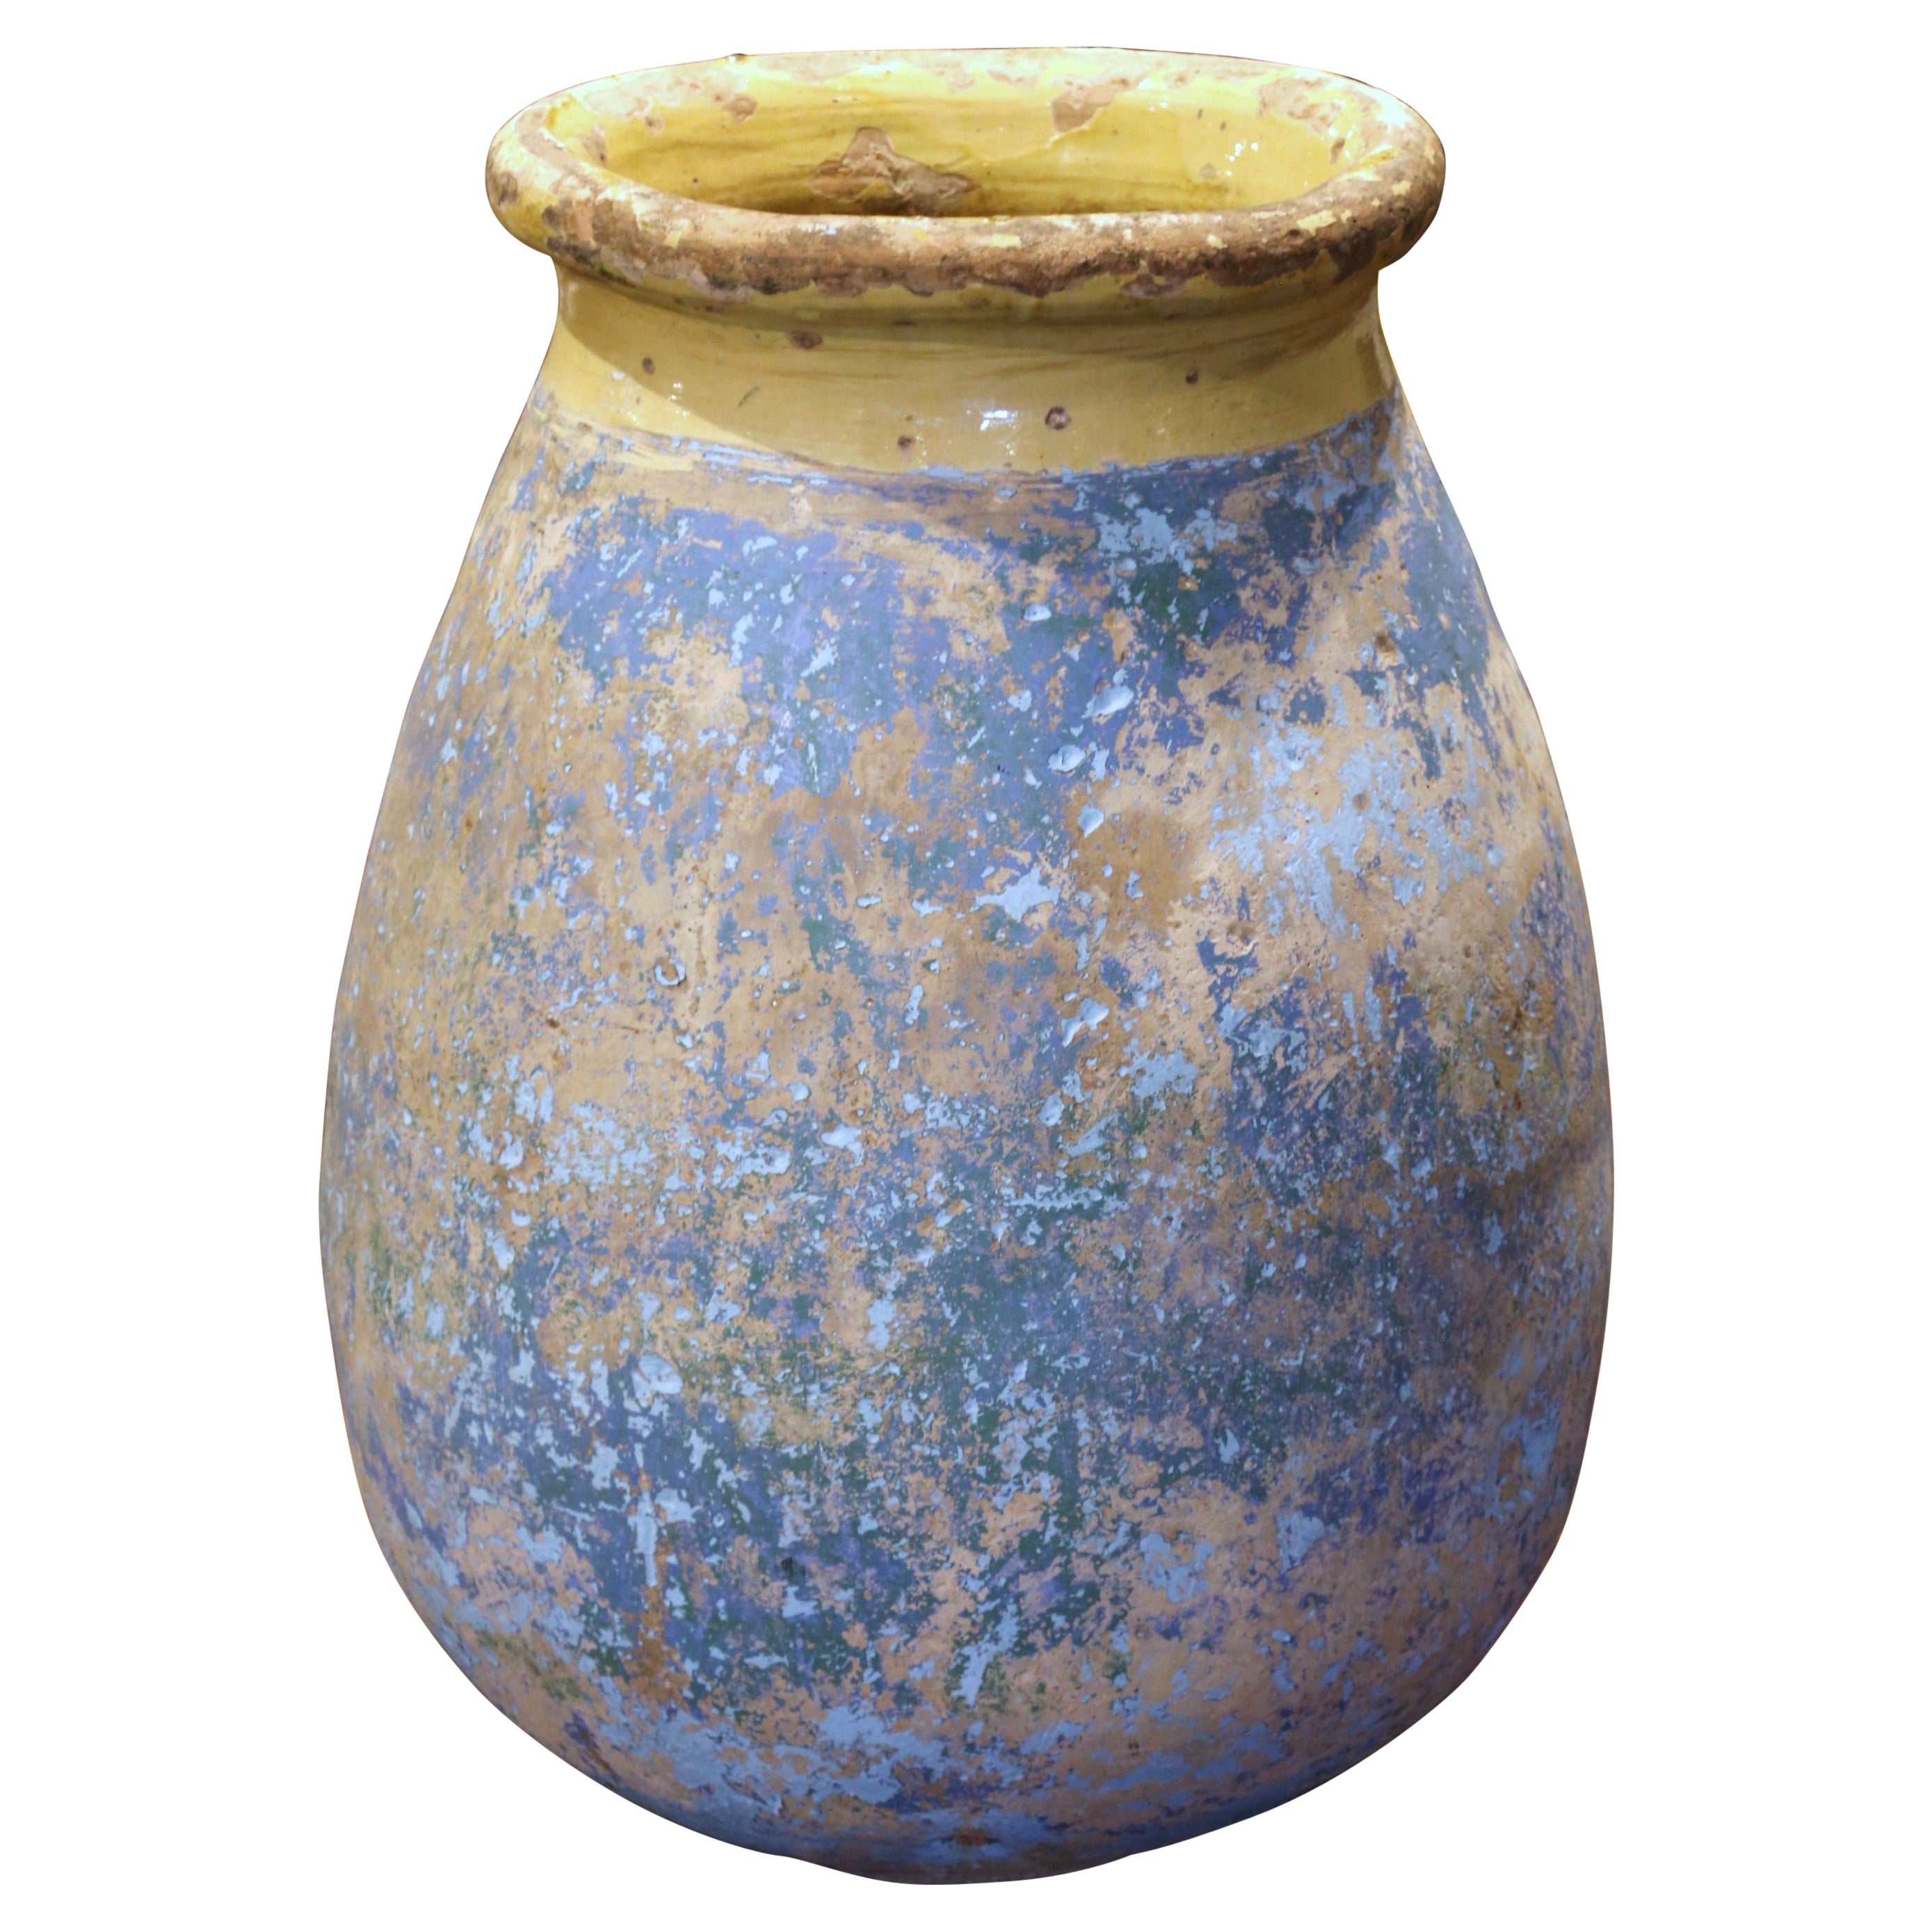 18th Century French Provencal Terracotta Olive Oil Jar from Biot 